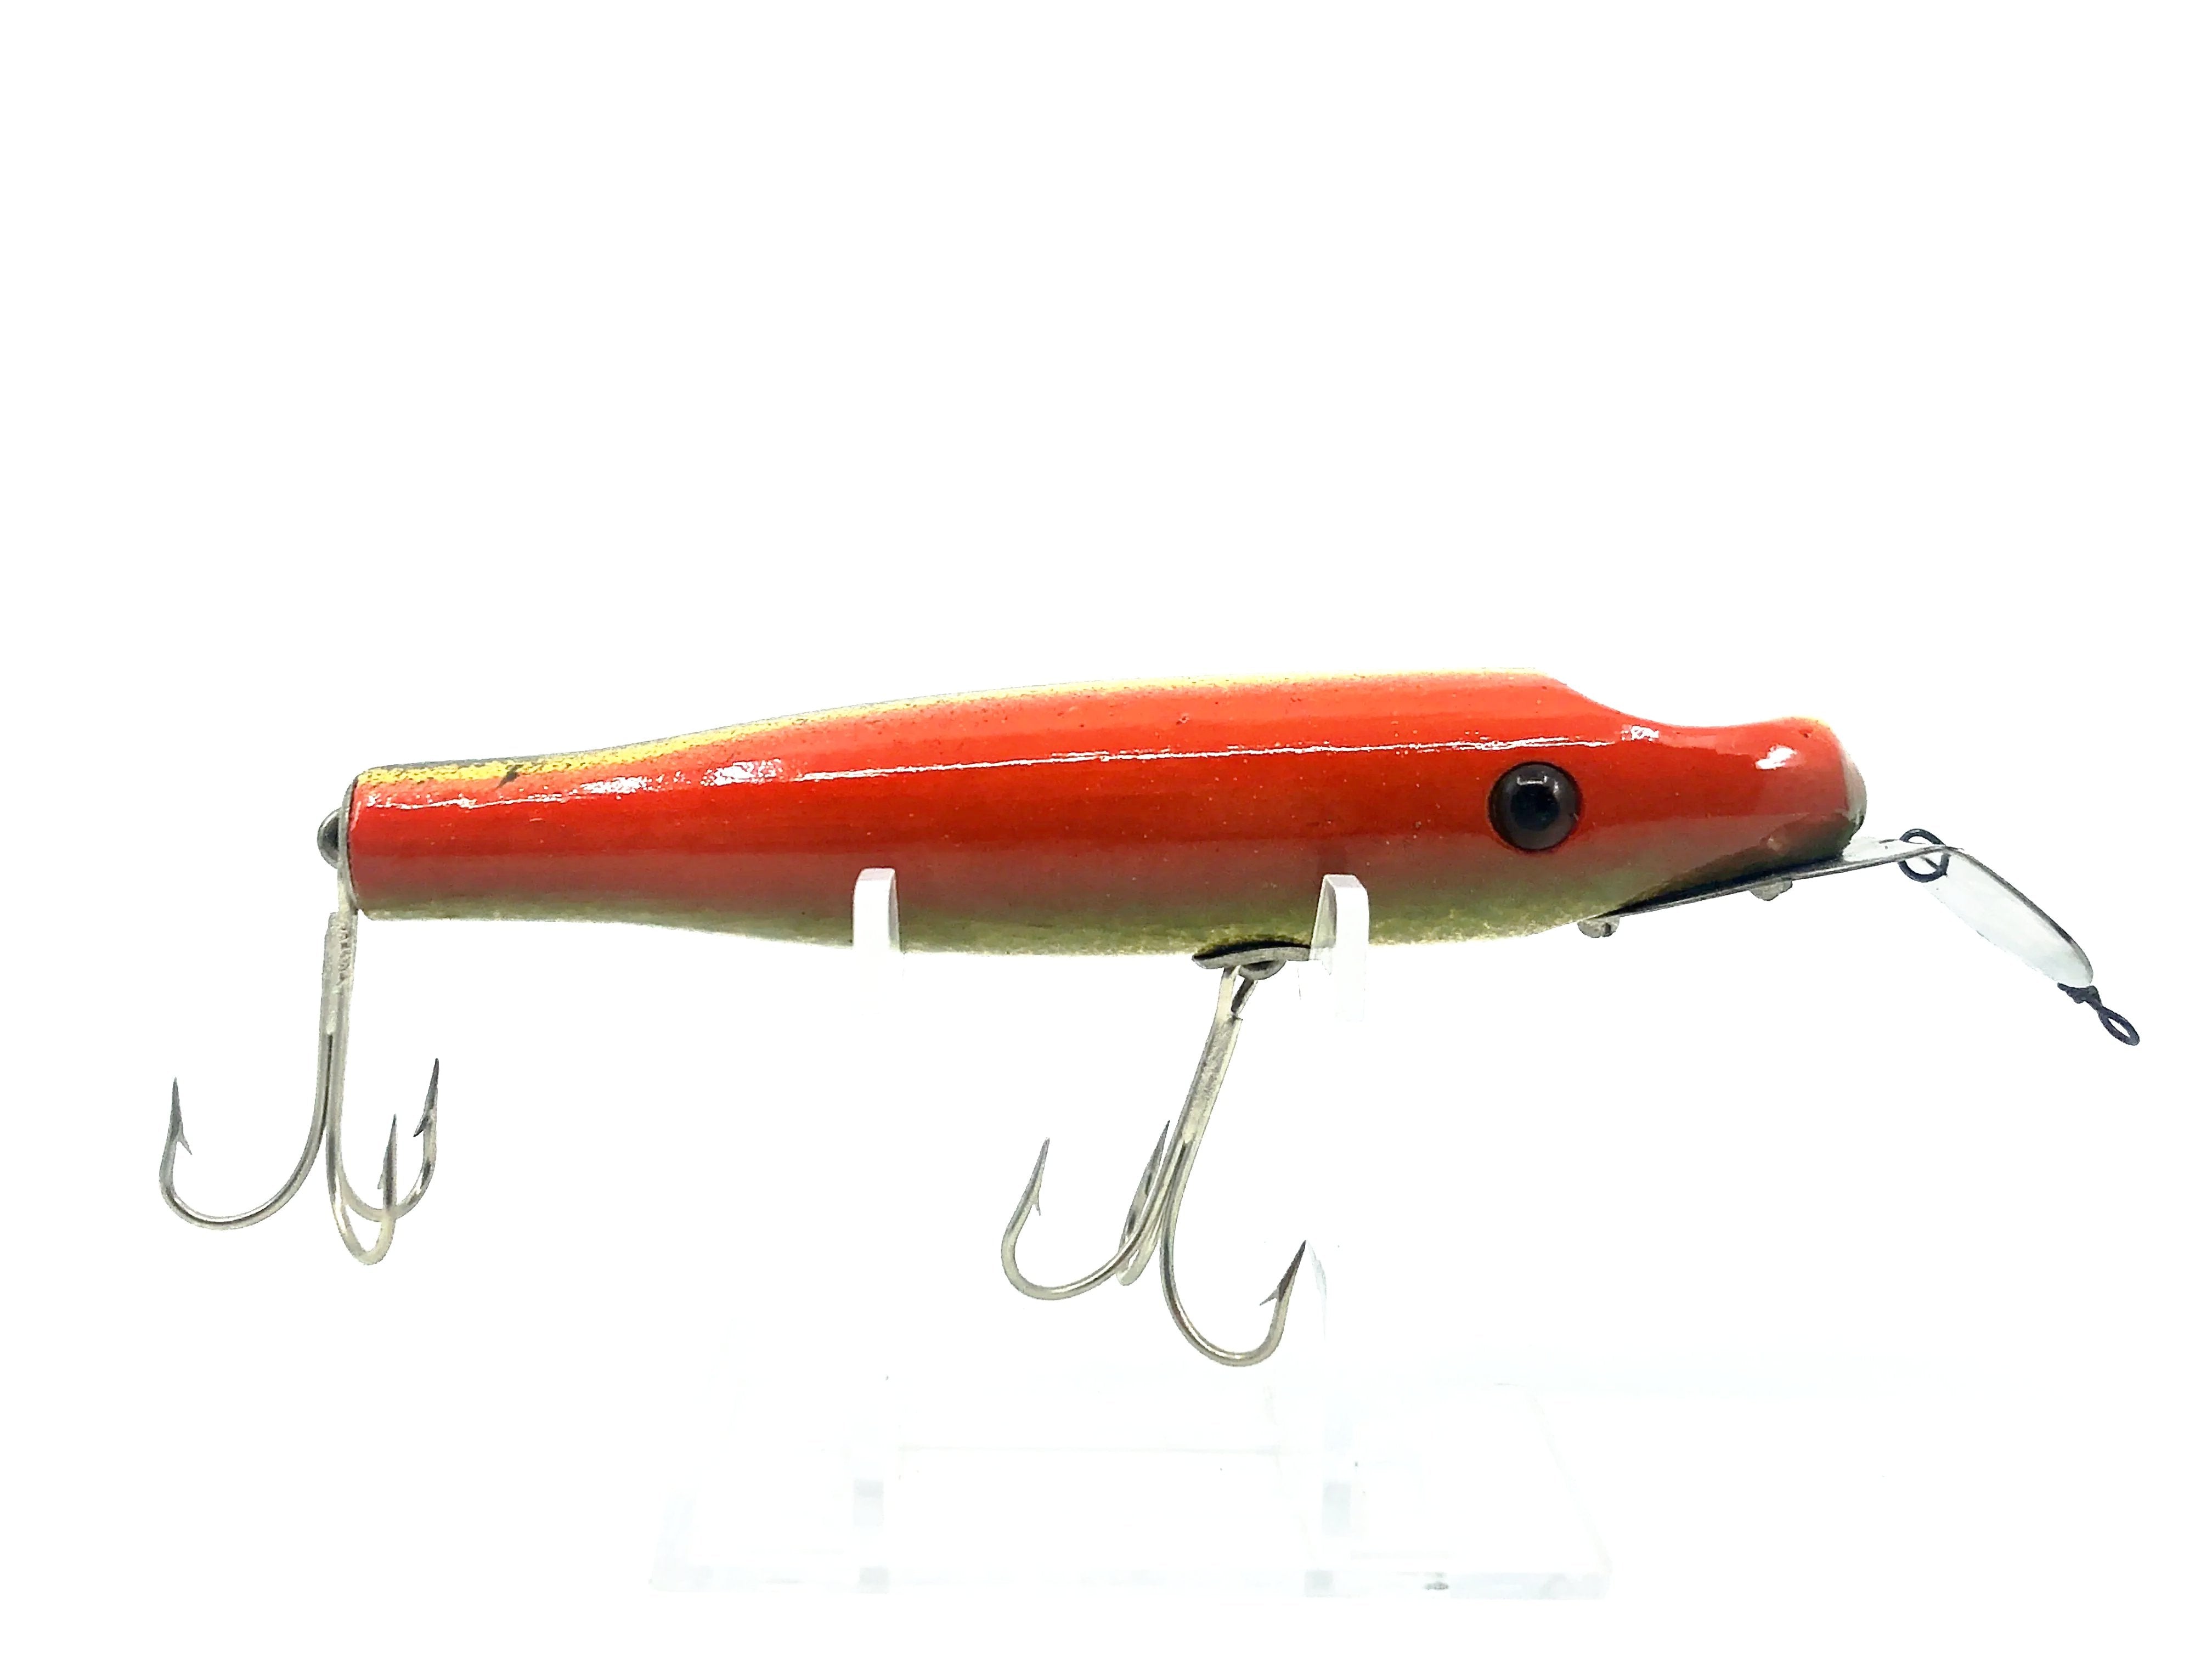 South Bend / Best-O-Luck #930 Pike Lure, Repainted Orange/Gold Color – My  Bait Shop, LLC